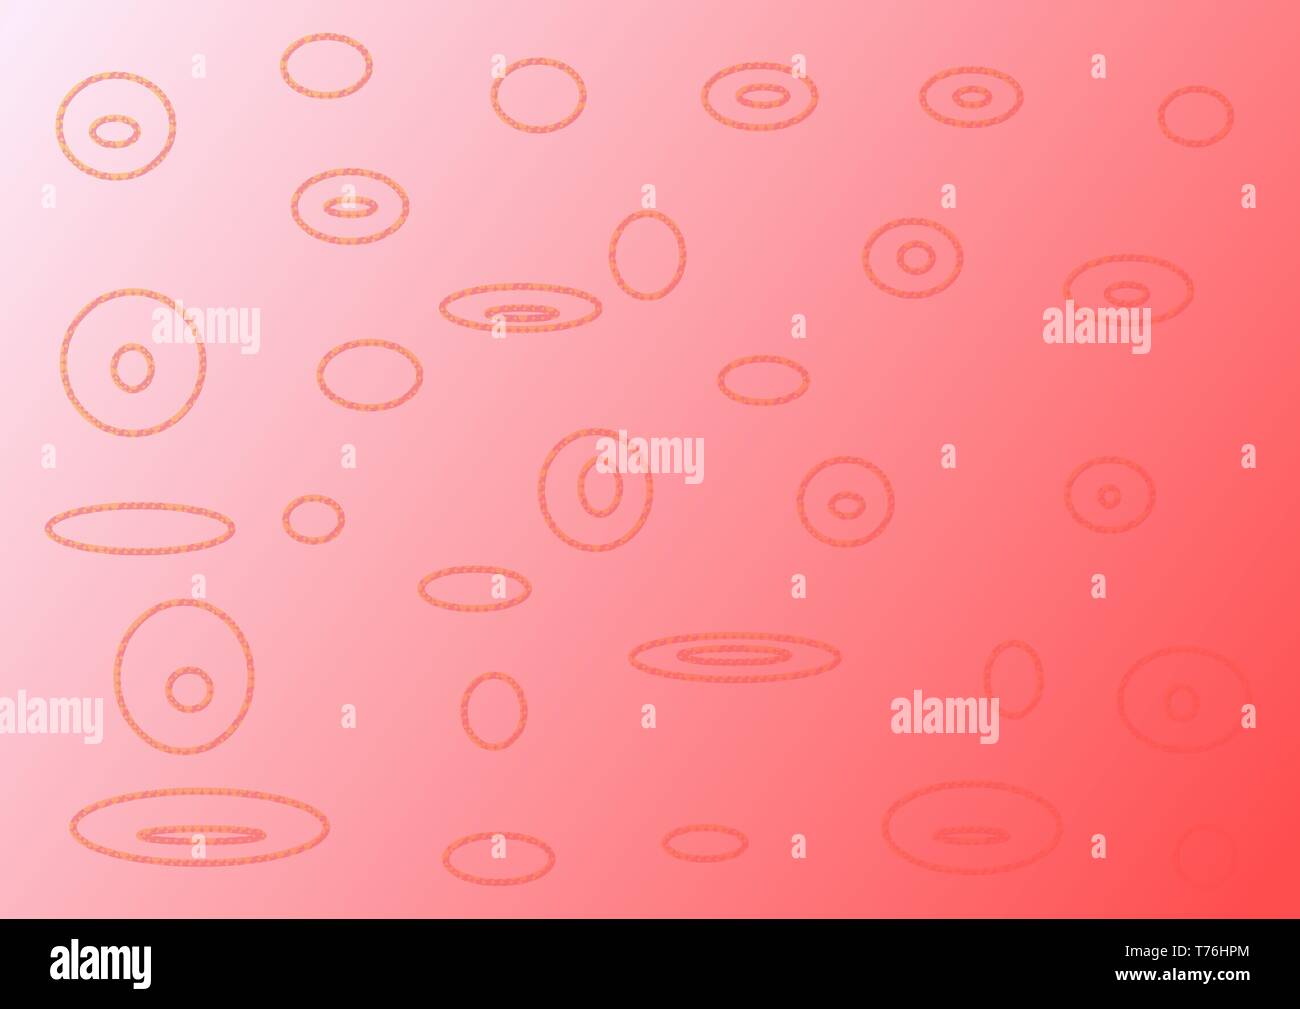 Pattern Of Circles On White Bright Pink Peach Color